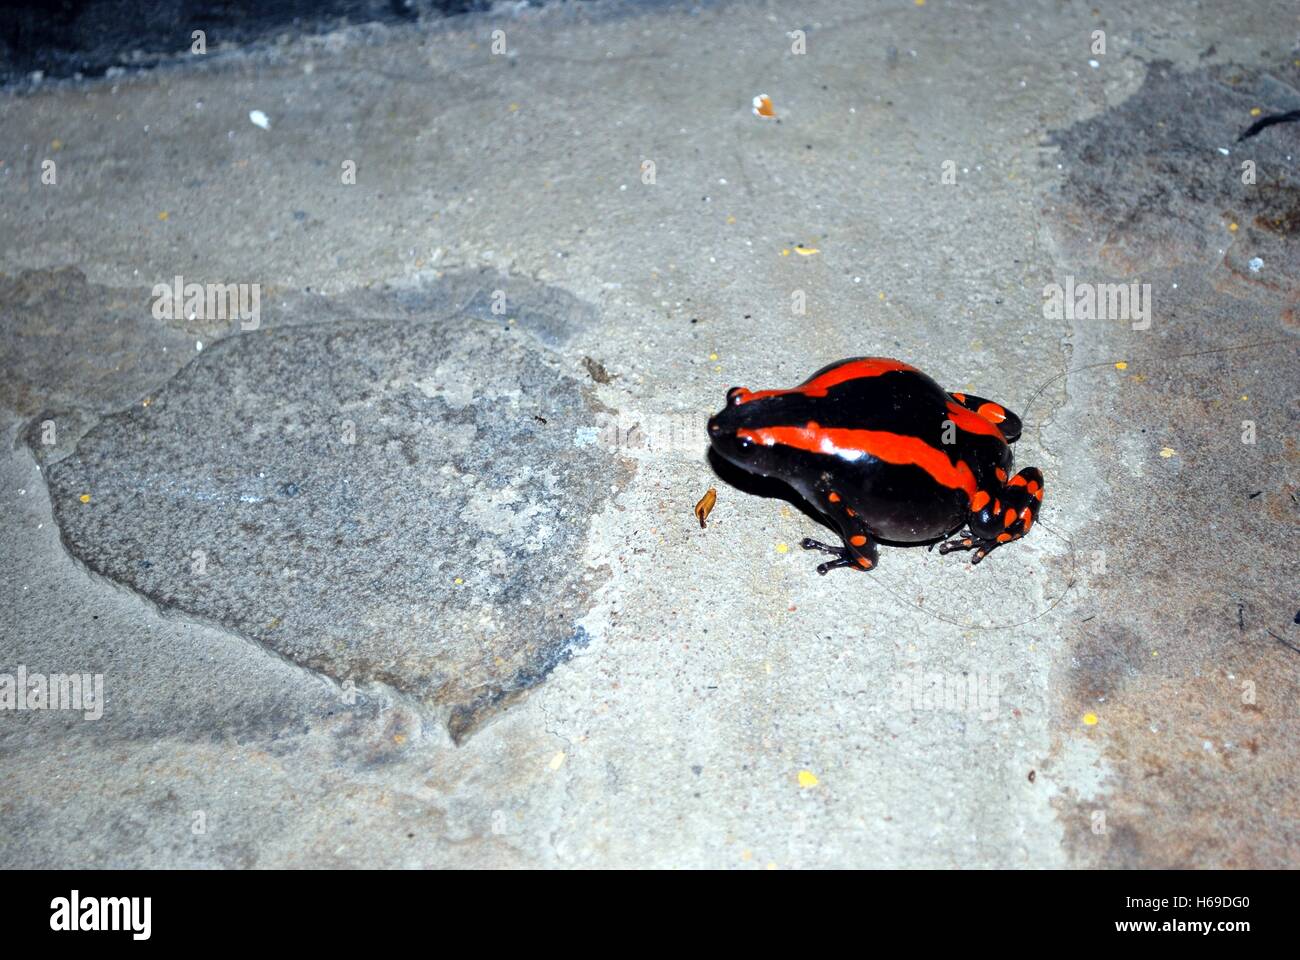 A black and red frog on a stone floor Stock Photo